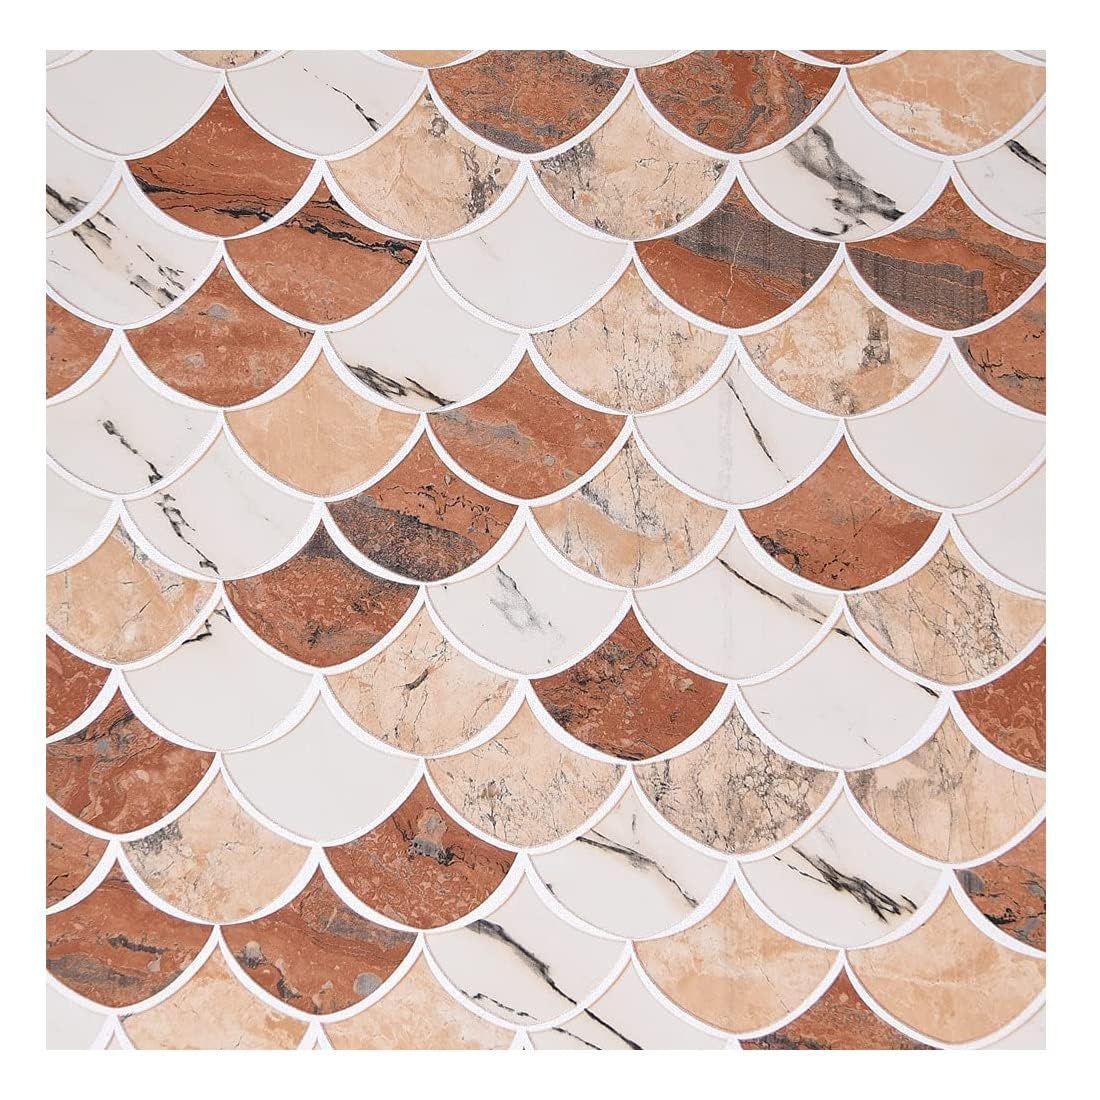 3D Latest Semi-Circle Design White & Brown Wallpaper Roll for Home Walls 57 Sq Ft (0.53m or 21 Inches x 10m or 33 Feet)